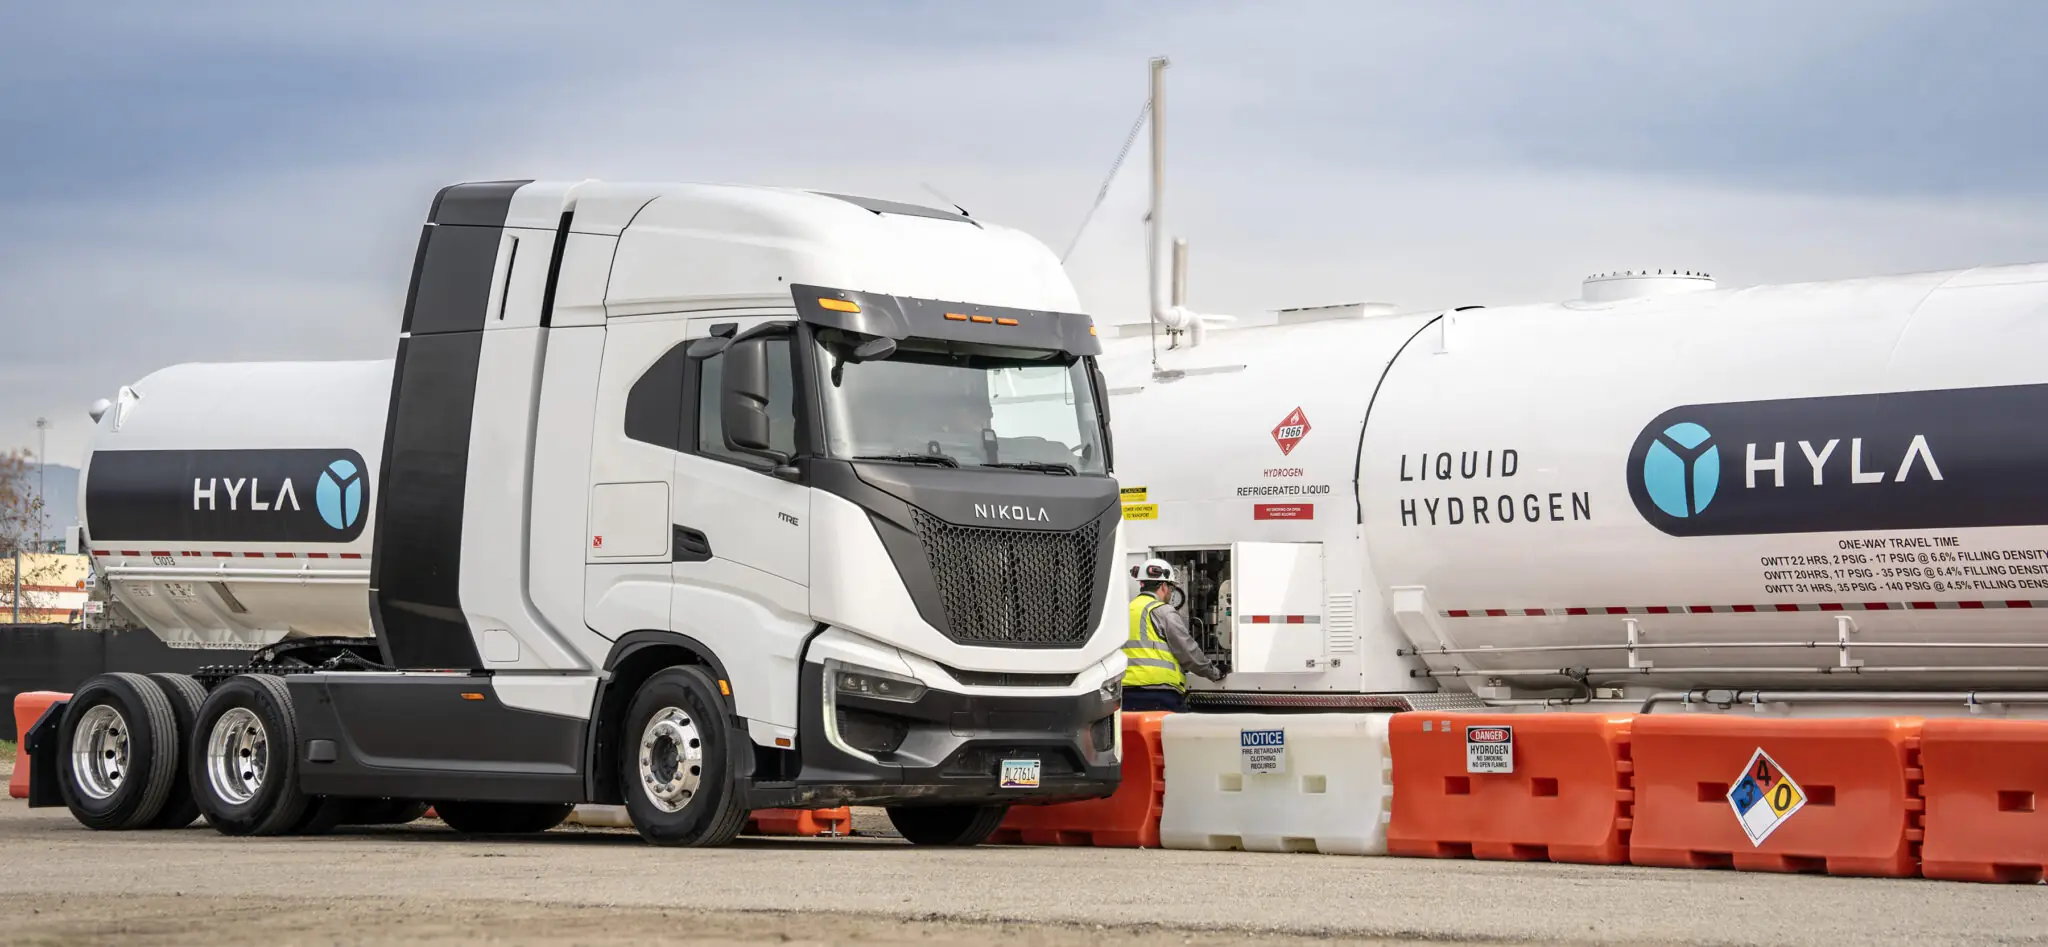 Nikola Corporation Launches First HYLA Hydrogen Refueling Station in Southern California